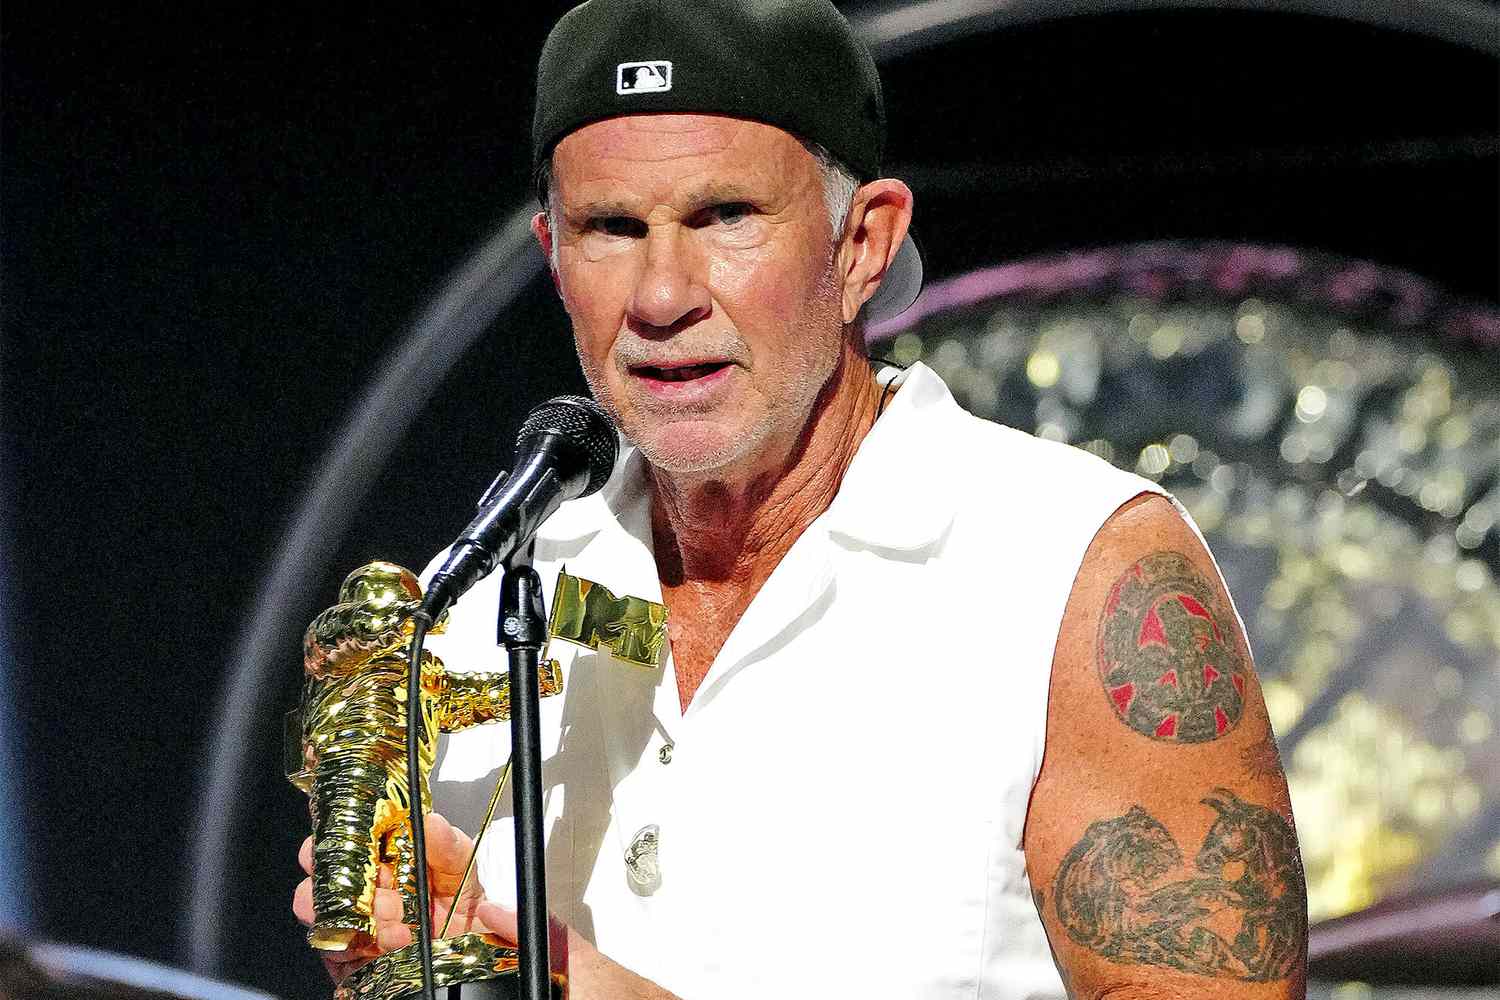 How Old Are the Red Hot Chili Peppers d